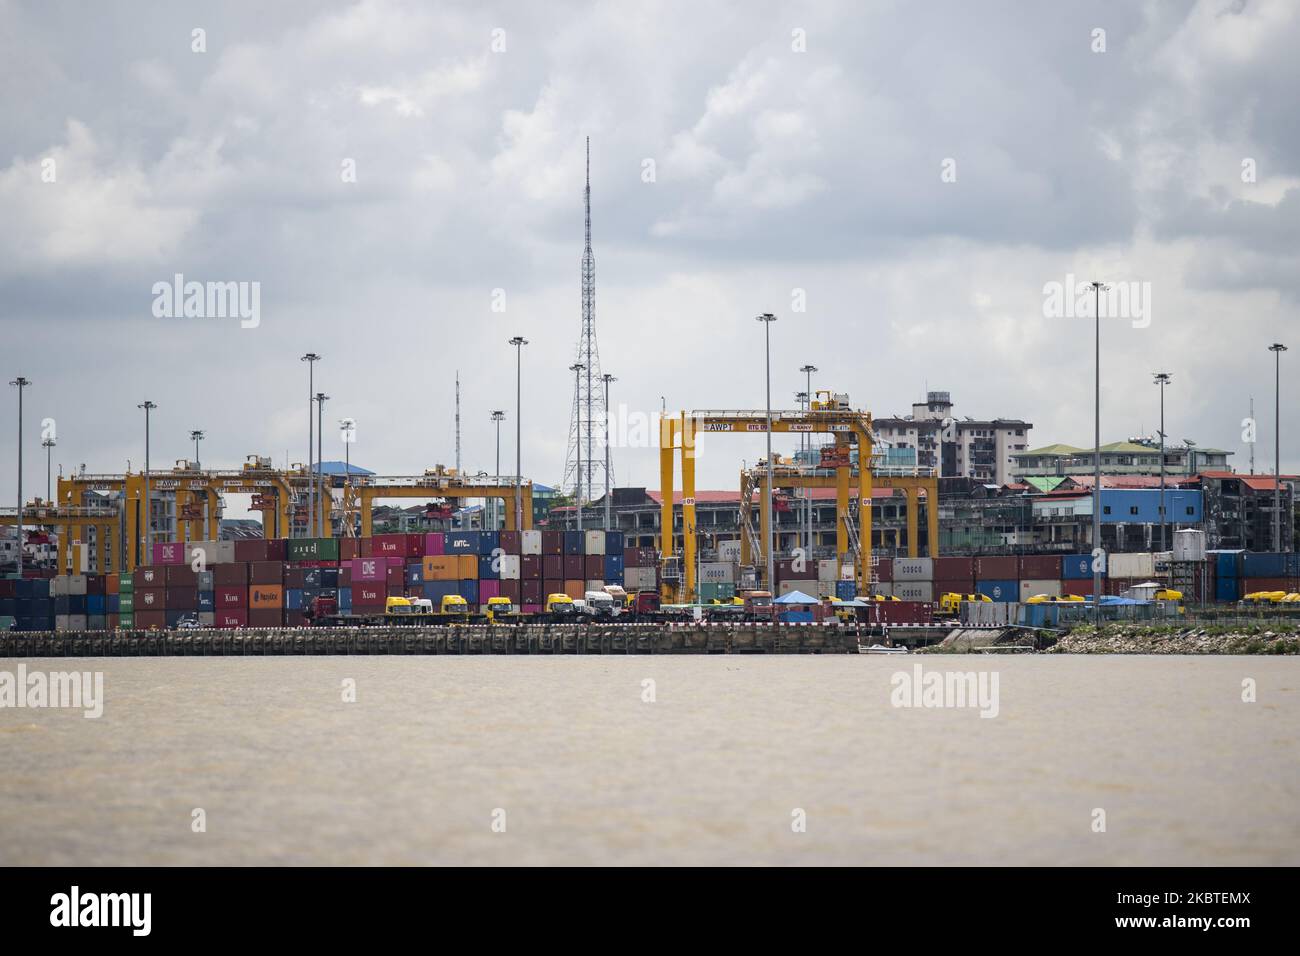 A general view of the Asia World port terminal located along the Yangon river in Yangon, Myanmar on 12 July, 2020. (Photo by Shwe Paw Mya Tin/NurPhoto) Stock Photo